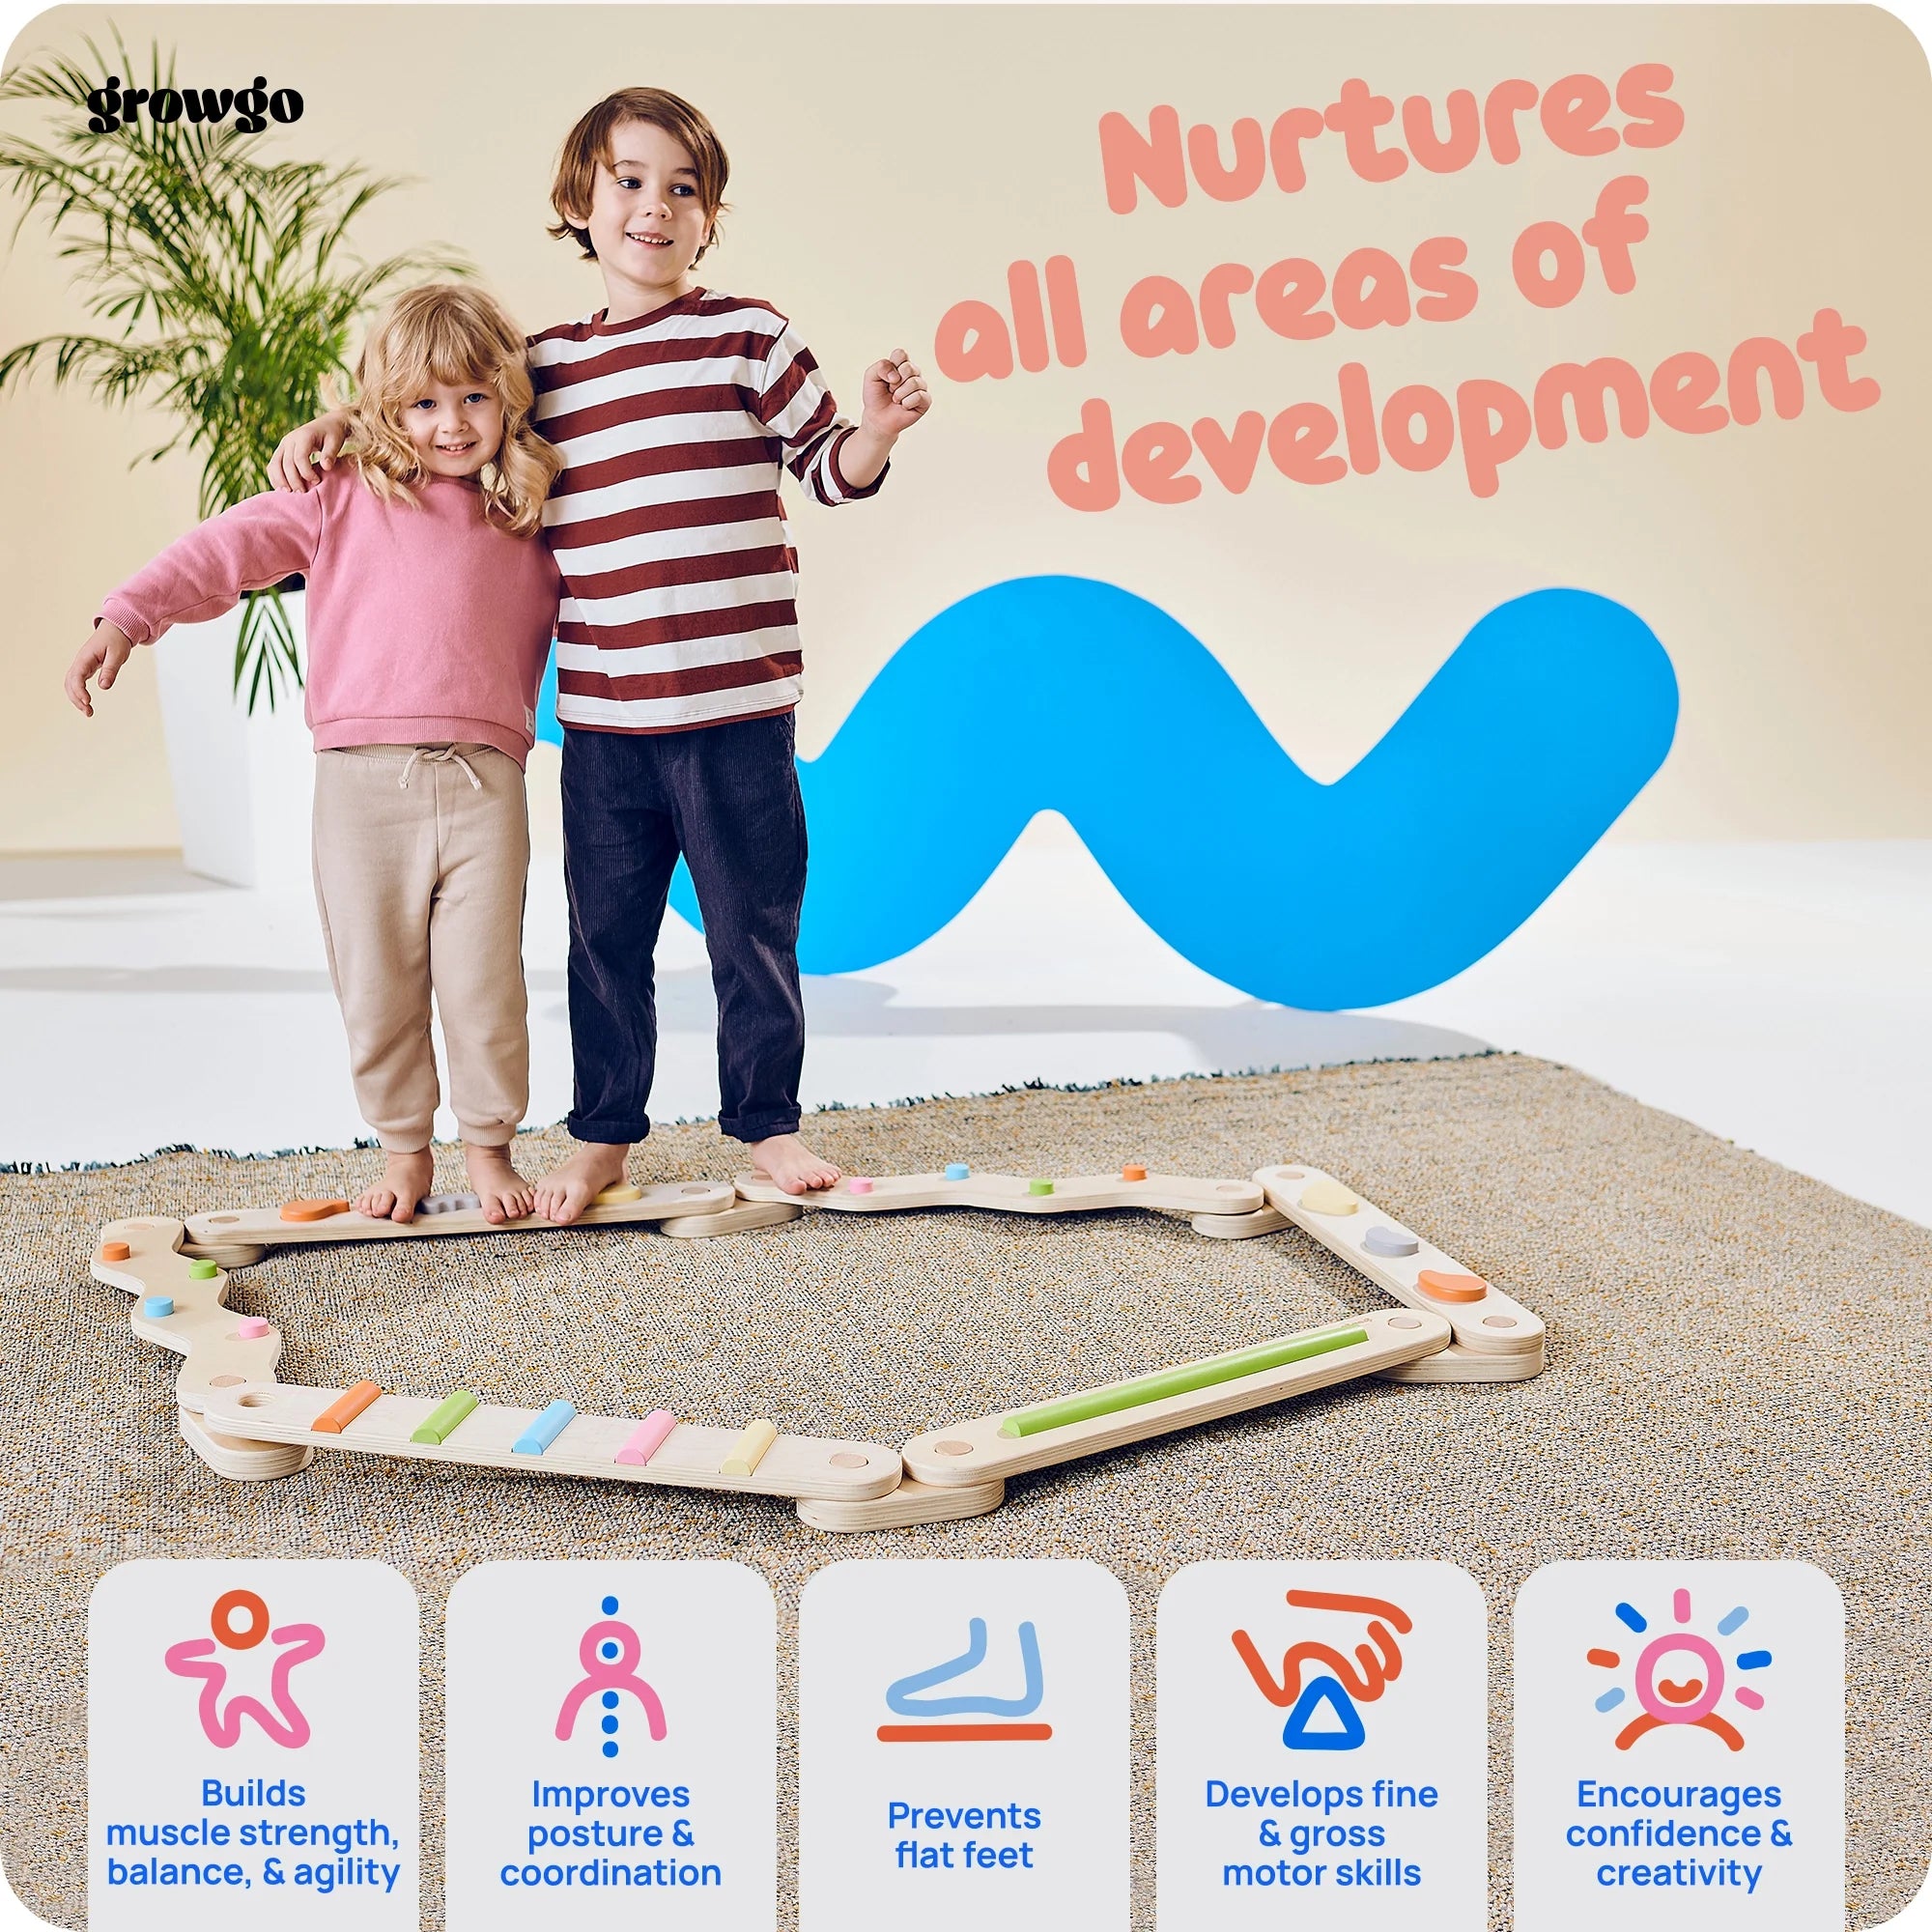 Balance Beams Set 2 in 1 Inspired by Montessori